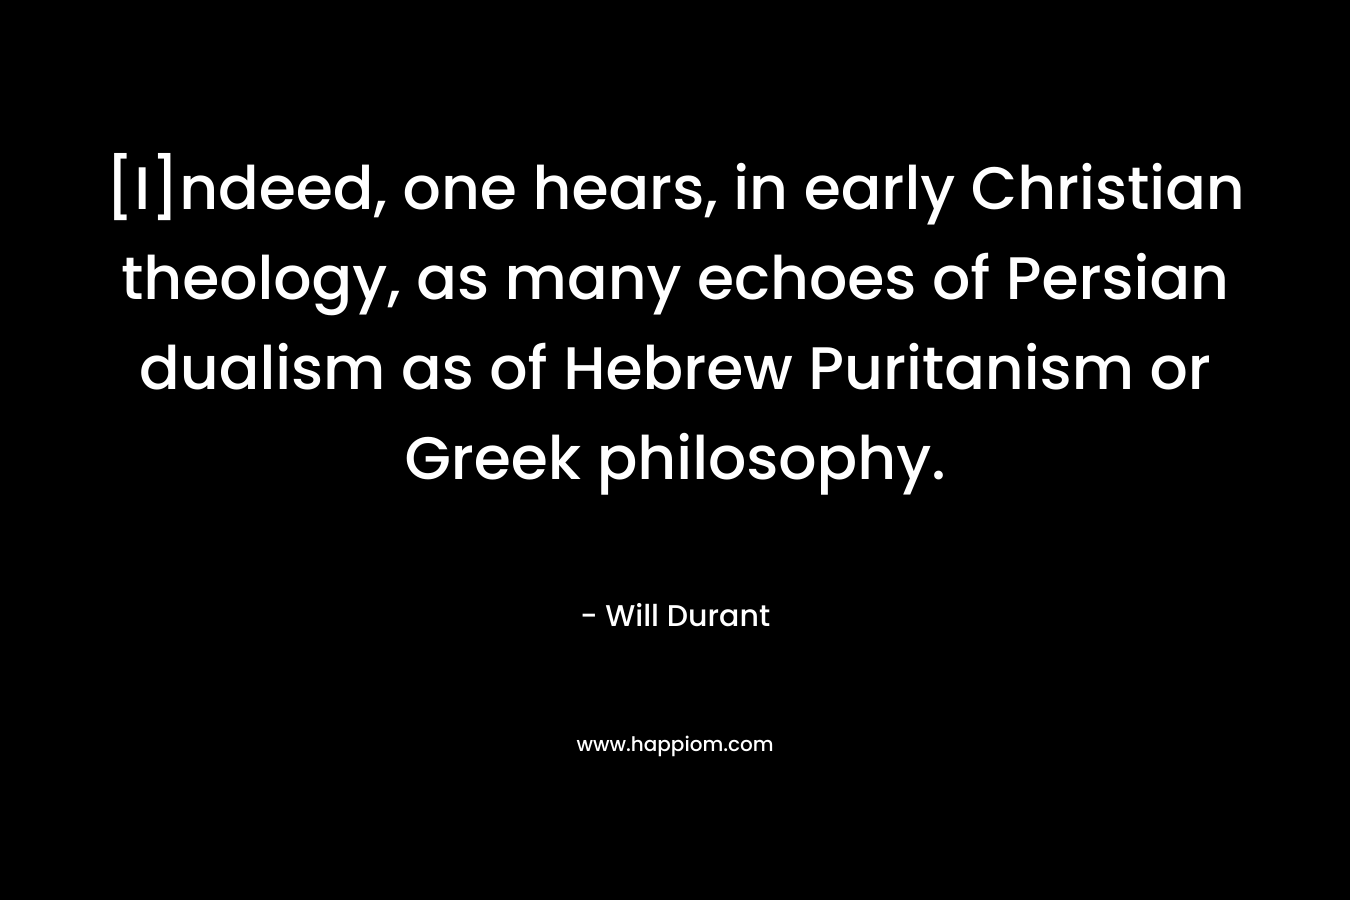 [I]ndeed, one hears, in early Christian theology, as many echoes of Persian dualism as of Hebrew Puritanism or Greek philosophy. – Will Durant